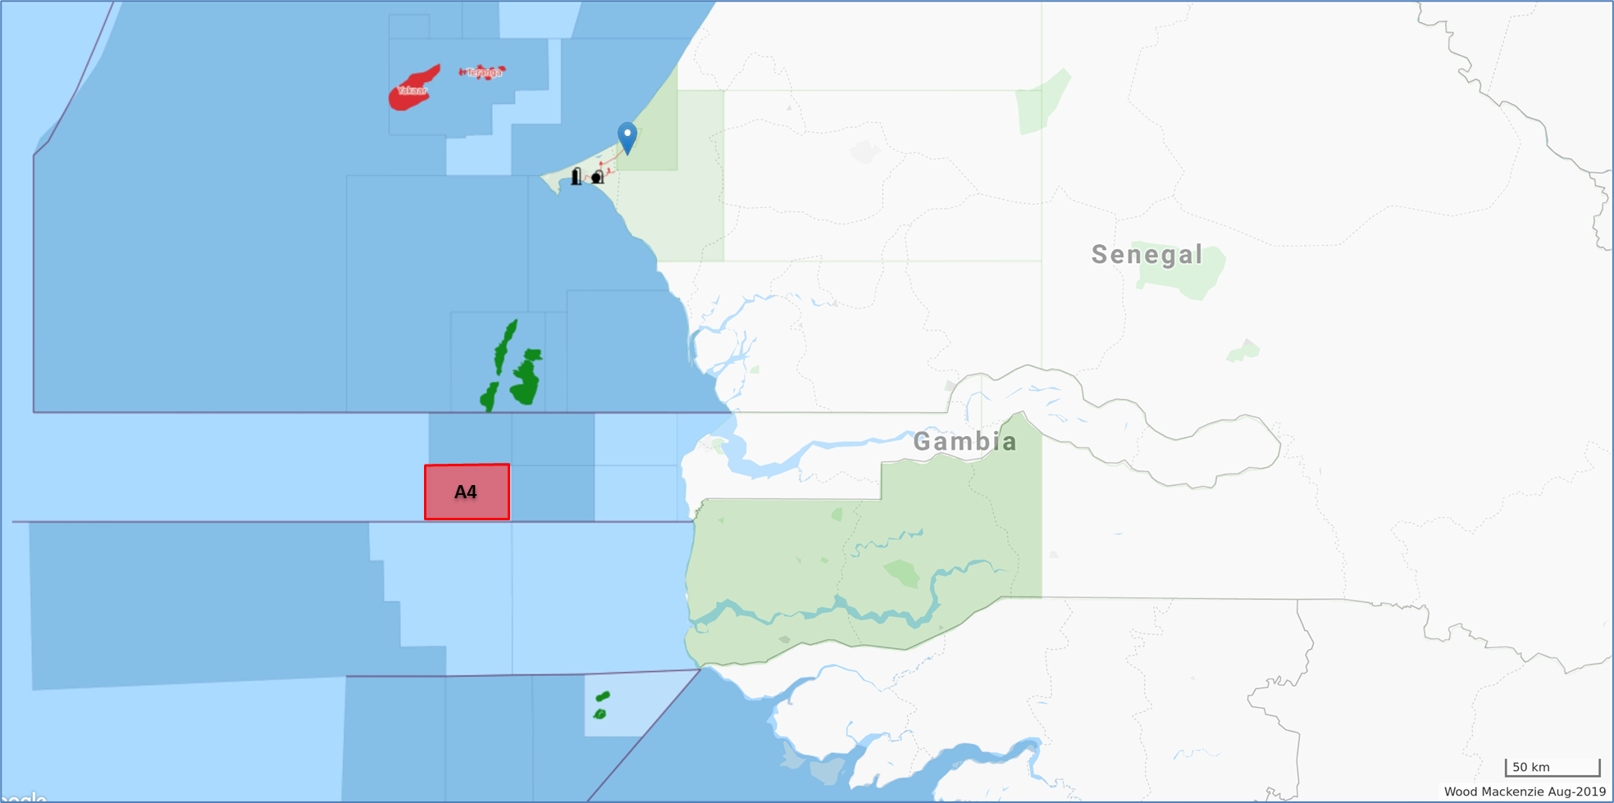 A4 licence off The Gambia - PetroNor